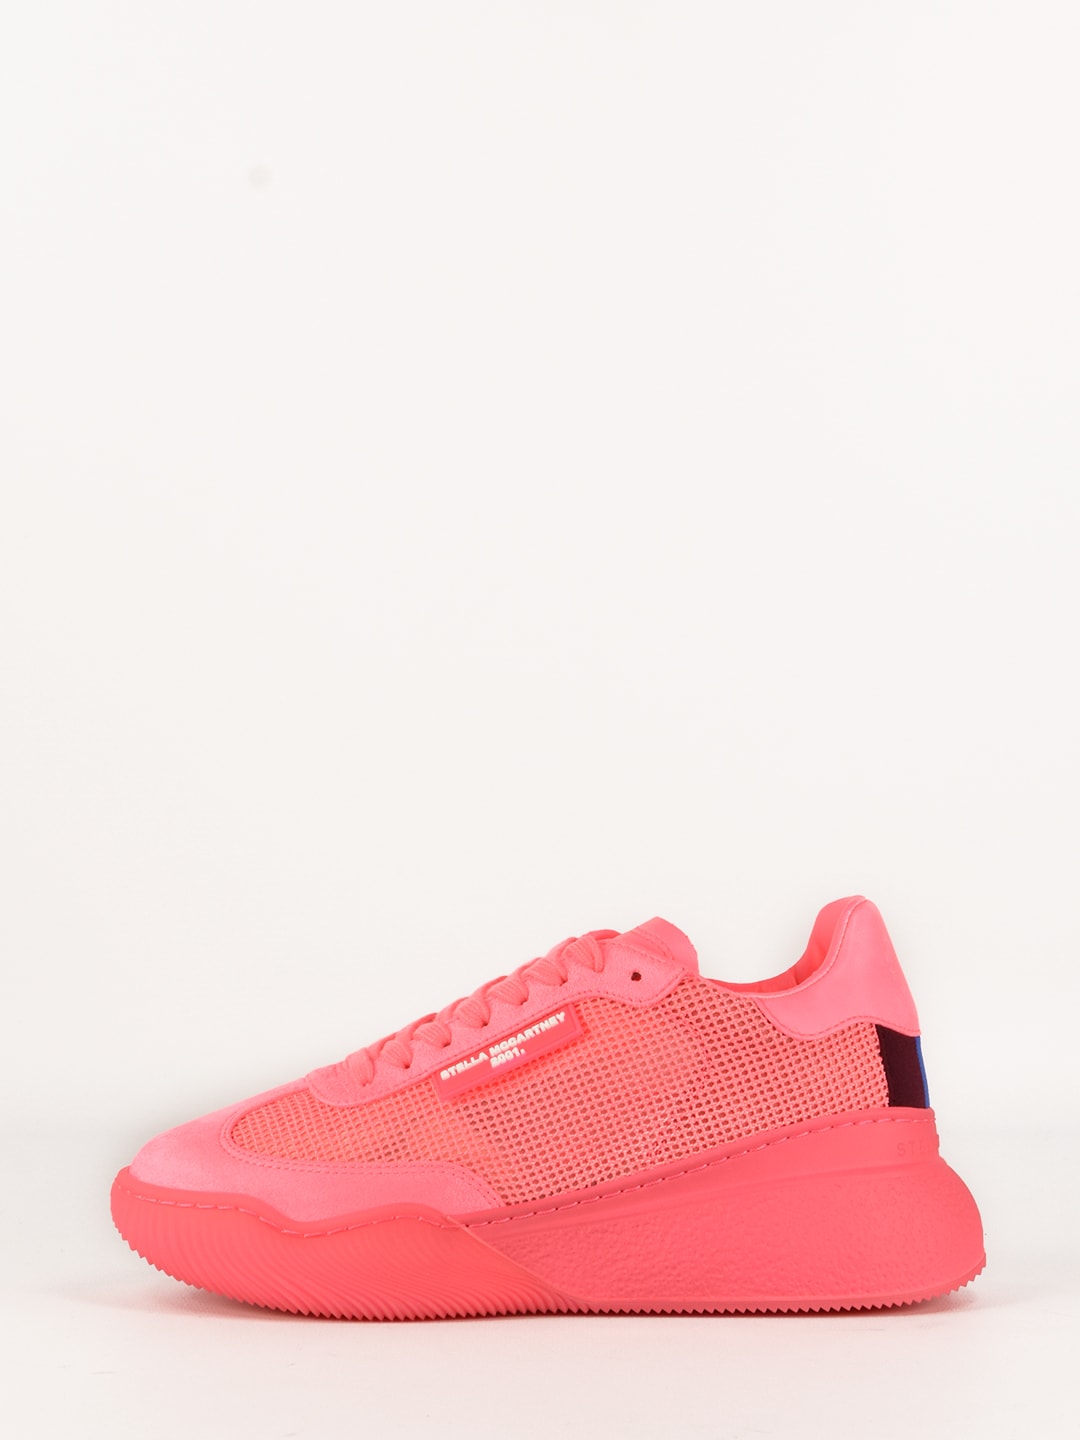 Buy Stella McCartney Bright Pink Loop Sneakers online, shop Stella McCartney shoes with free shipping